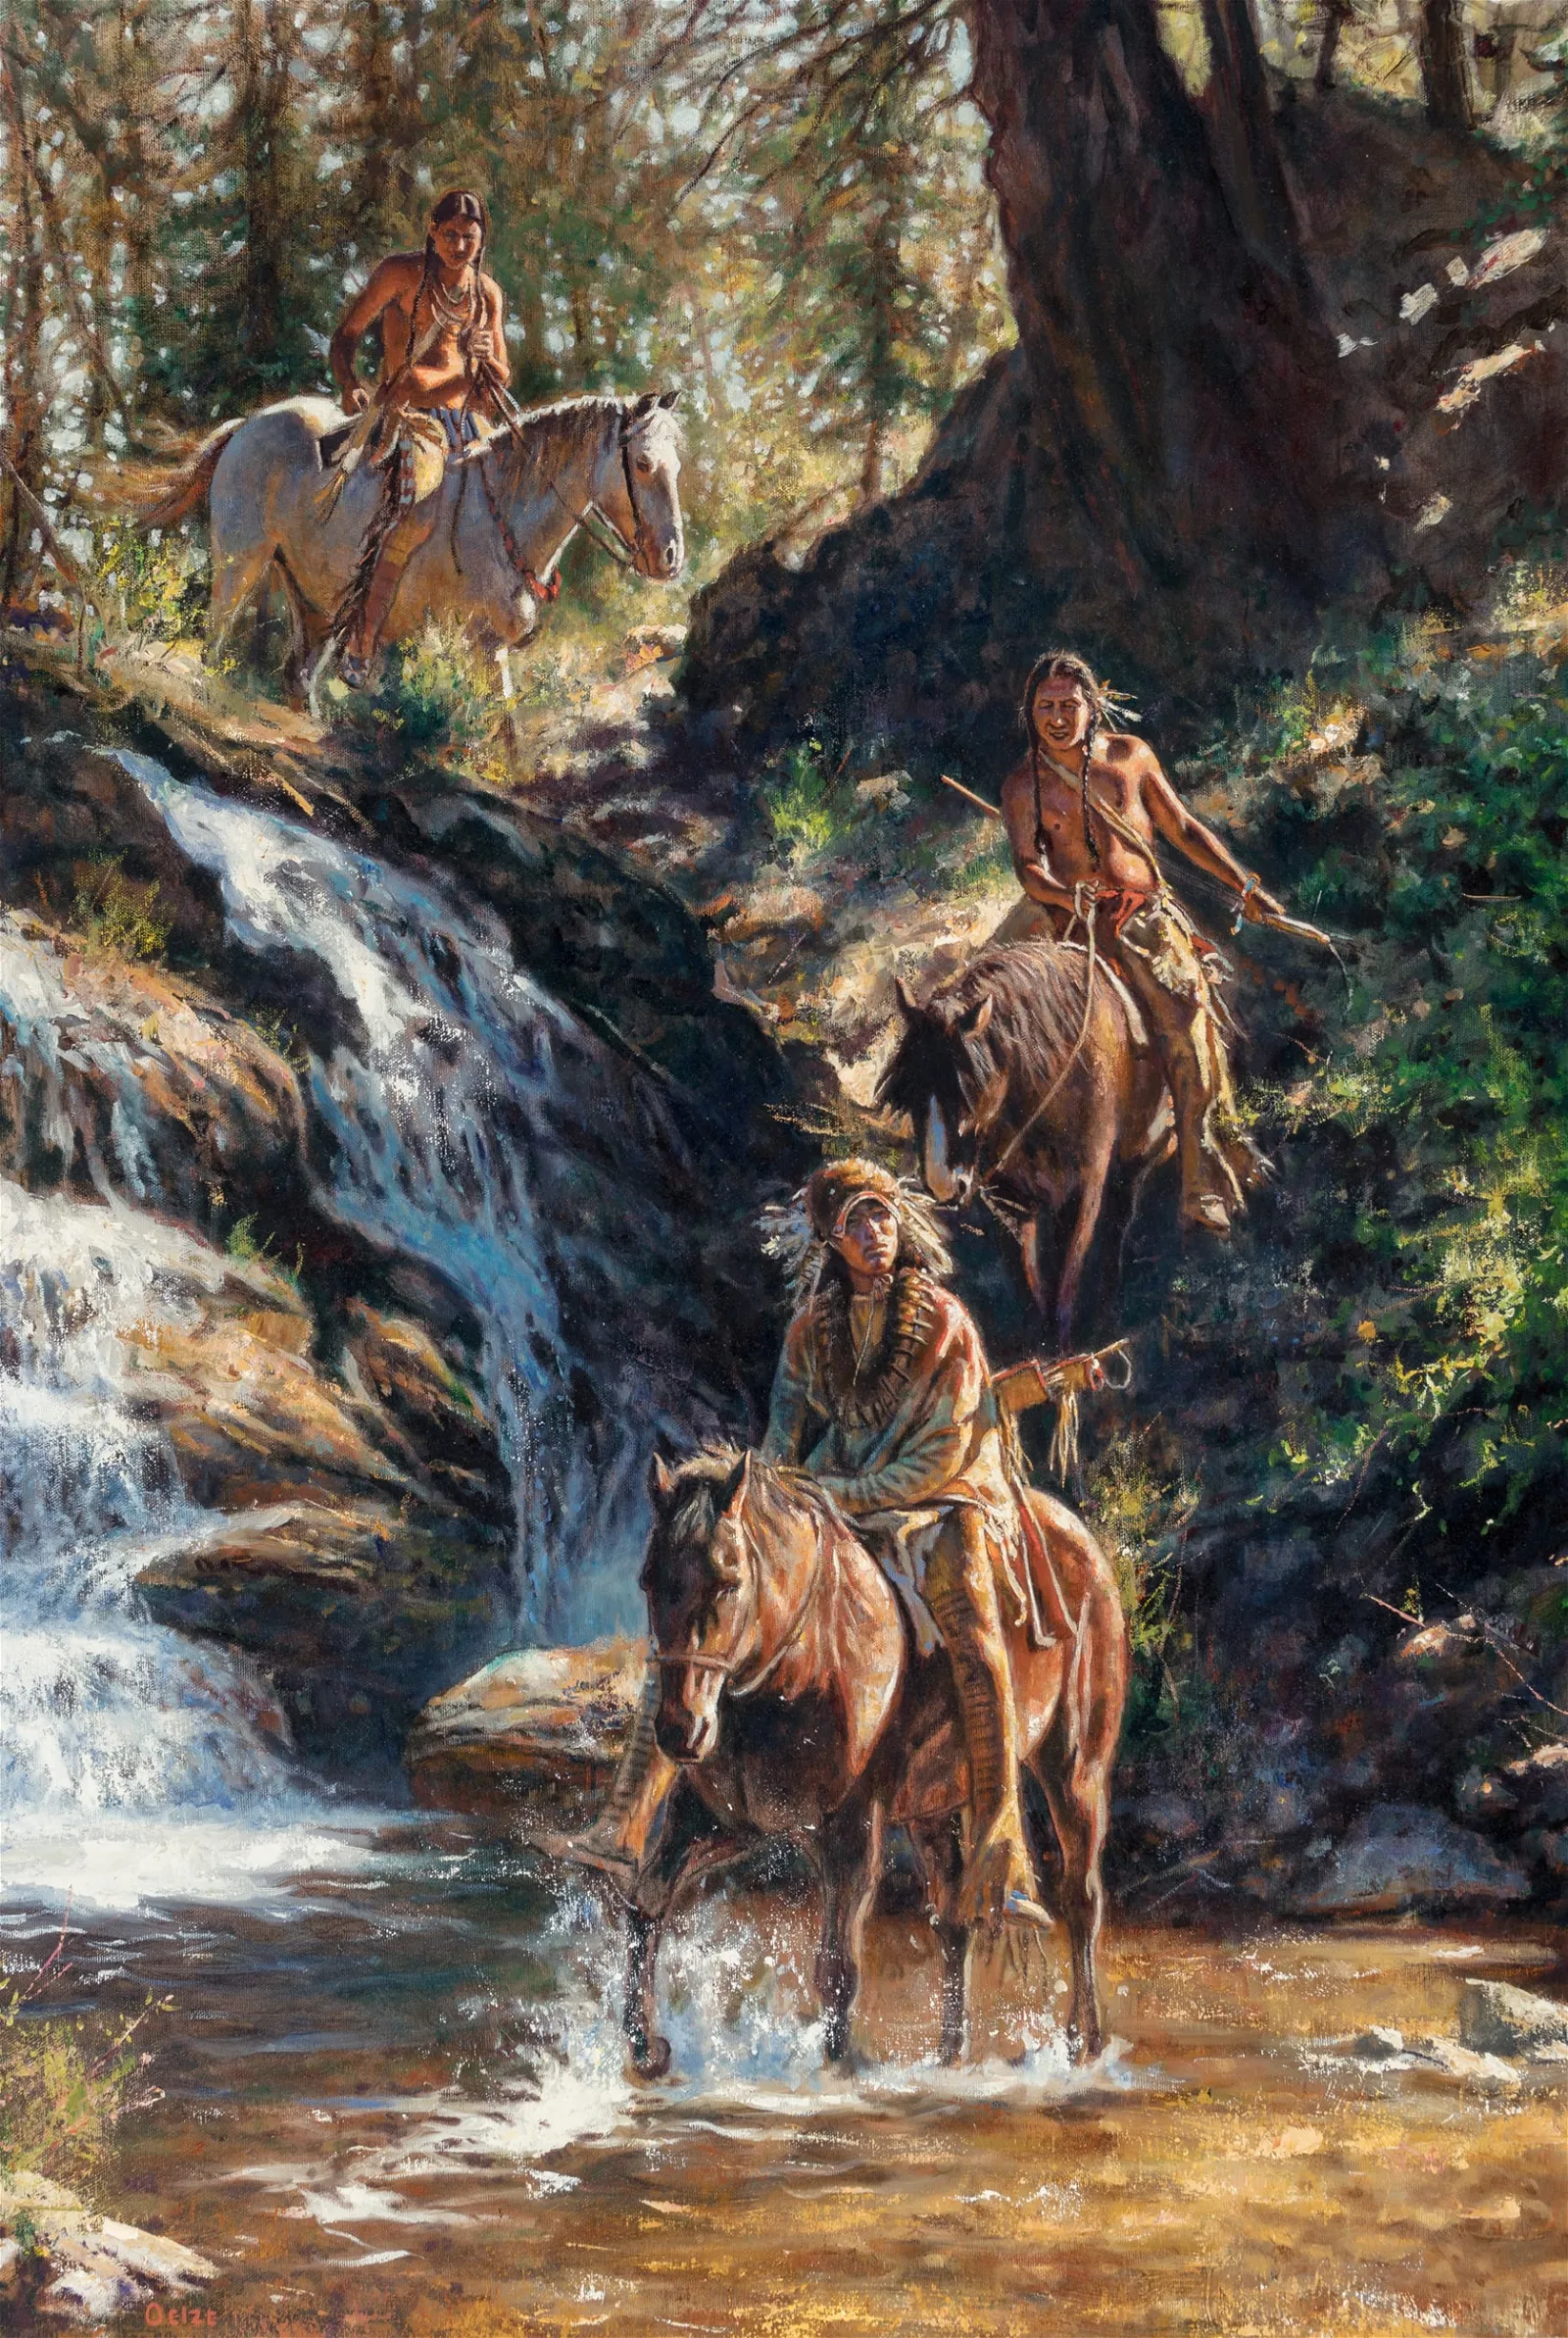 Don Oelze – Indians and Waterfall